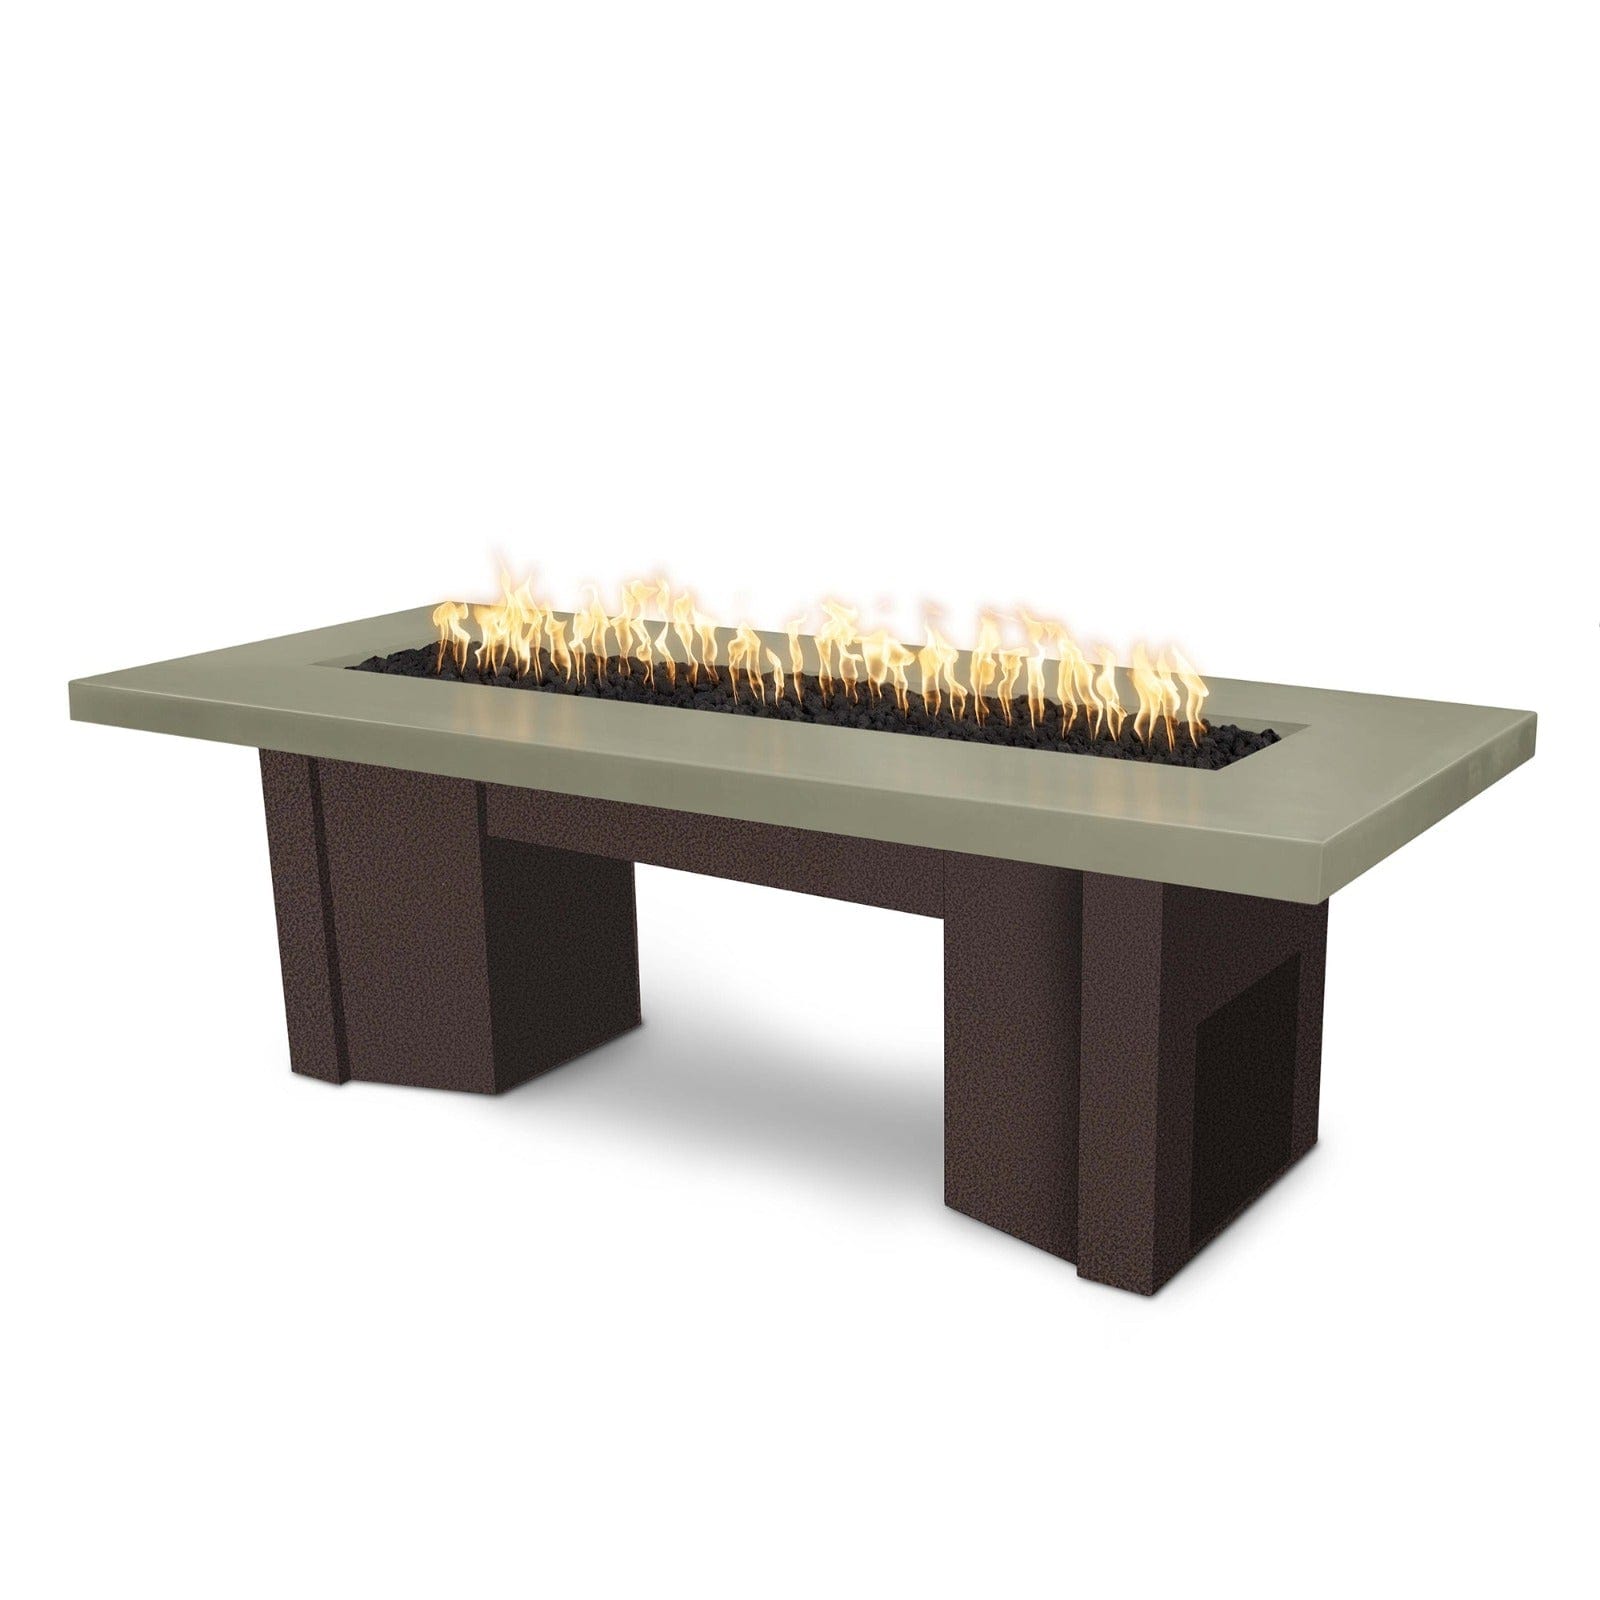 The Outdoor Plus Fire Features Ash (-ASH) / Copper Vein Powder Coated Steel (-CPV) The Outdoor Plus 78" Alameda Fire Table Smooth Concrete in Liquid Propane - Flame Sense System with Push Button Spark Igniter / OPT-ALMGFRC78FSEN-LP